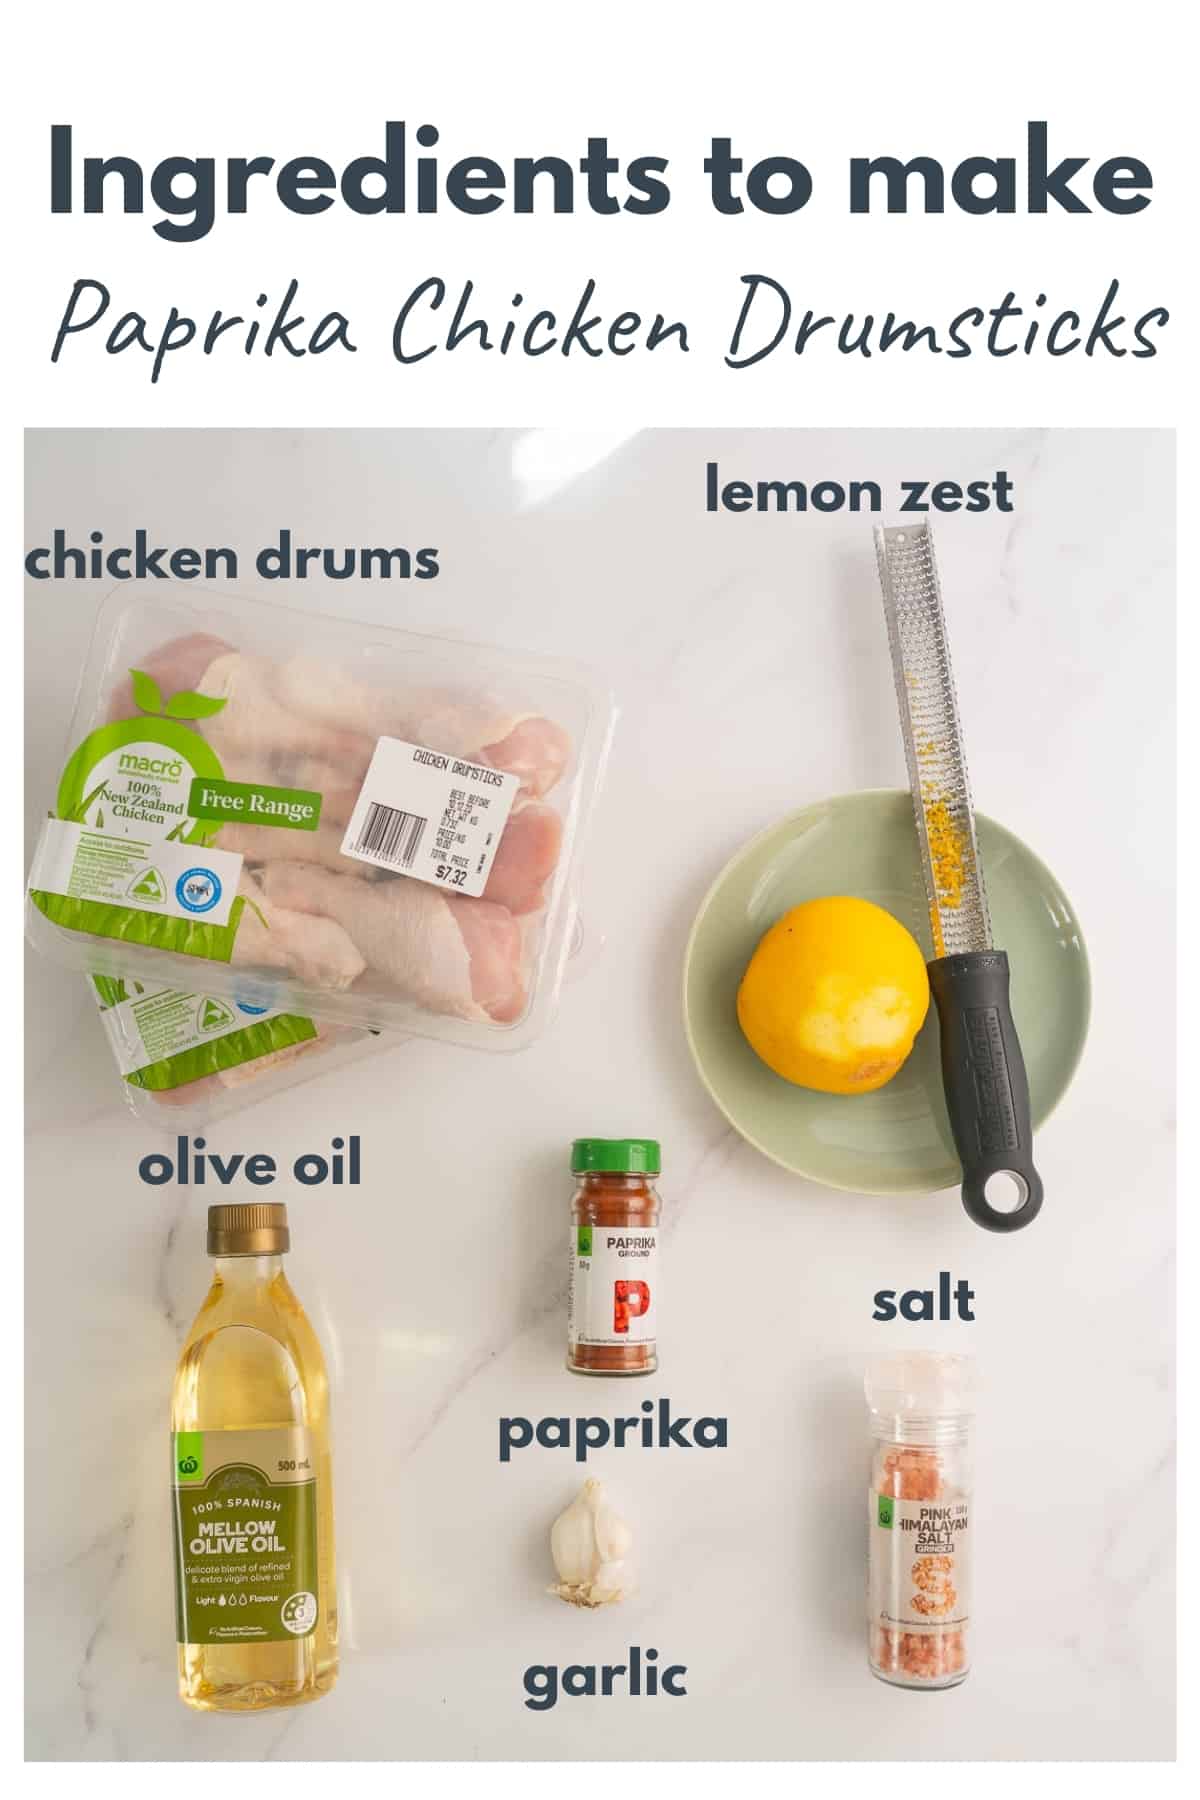 Ingredients for paprika chicken drumsticks laid out on a bench top with text overlay.